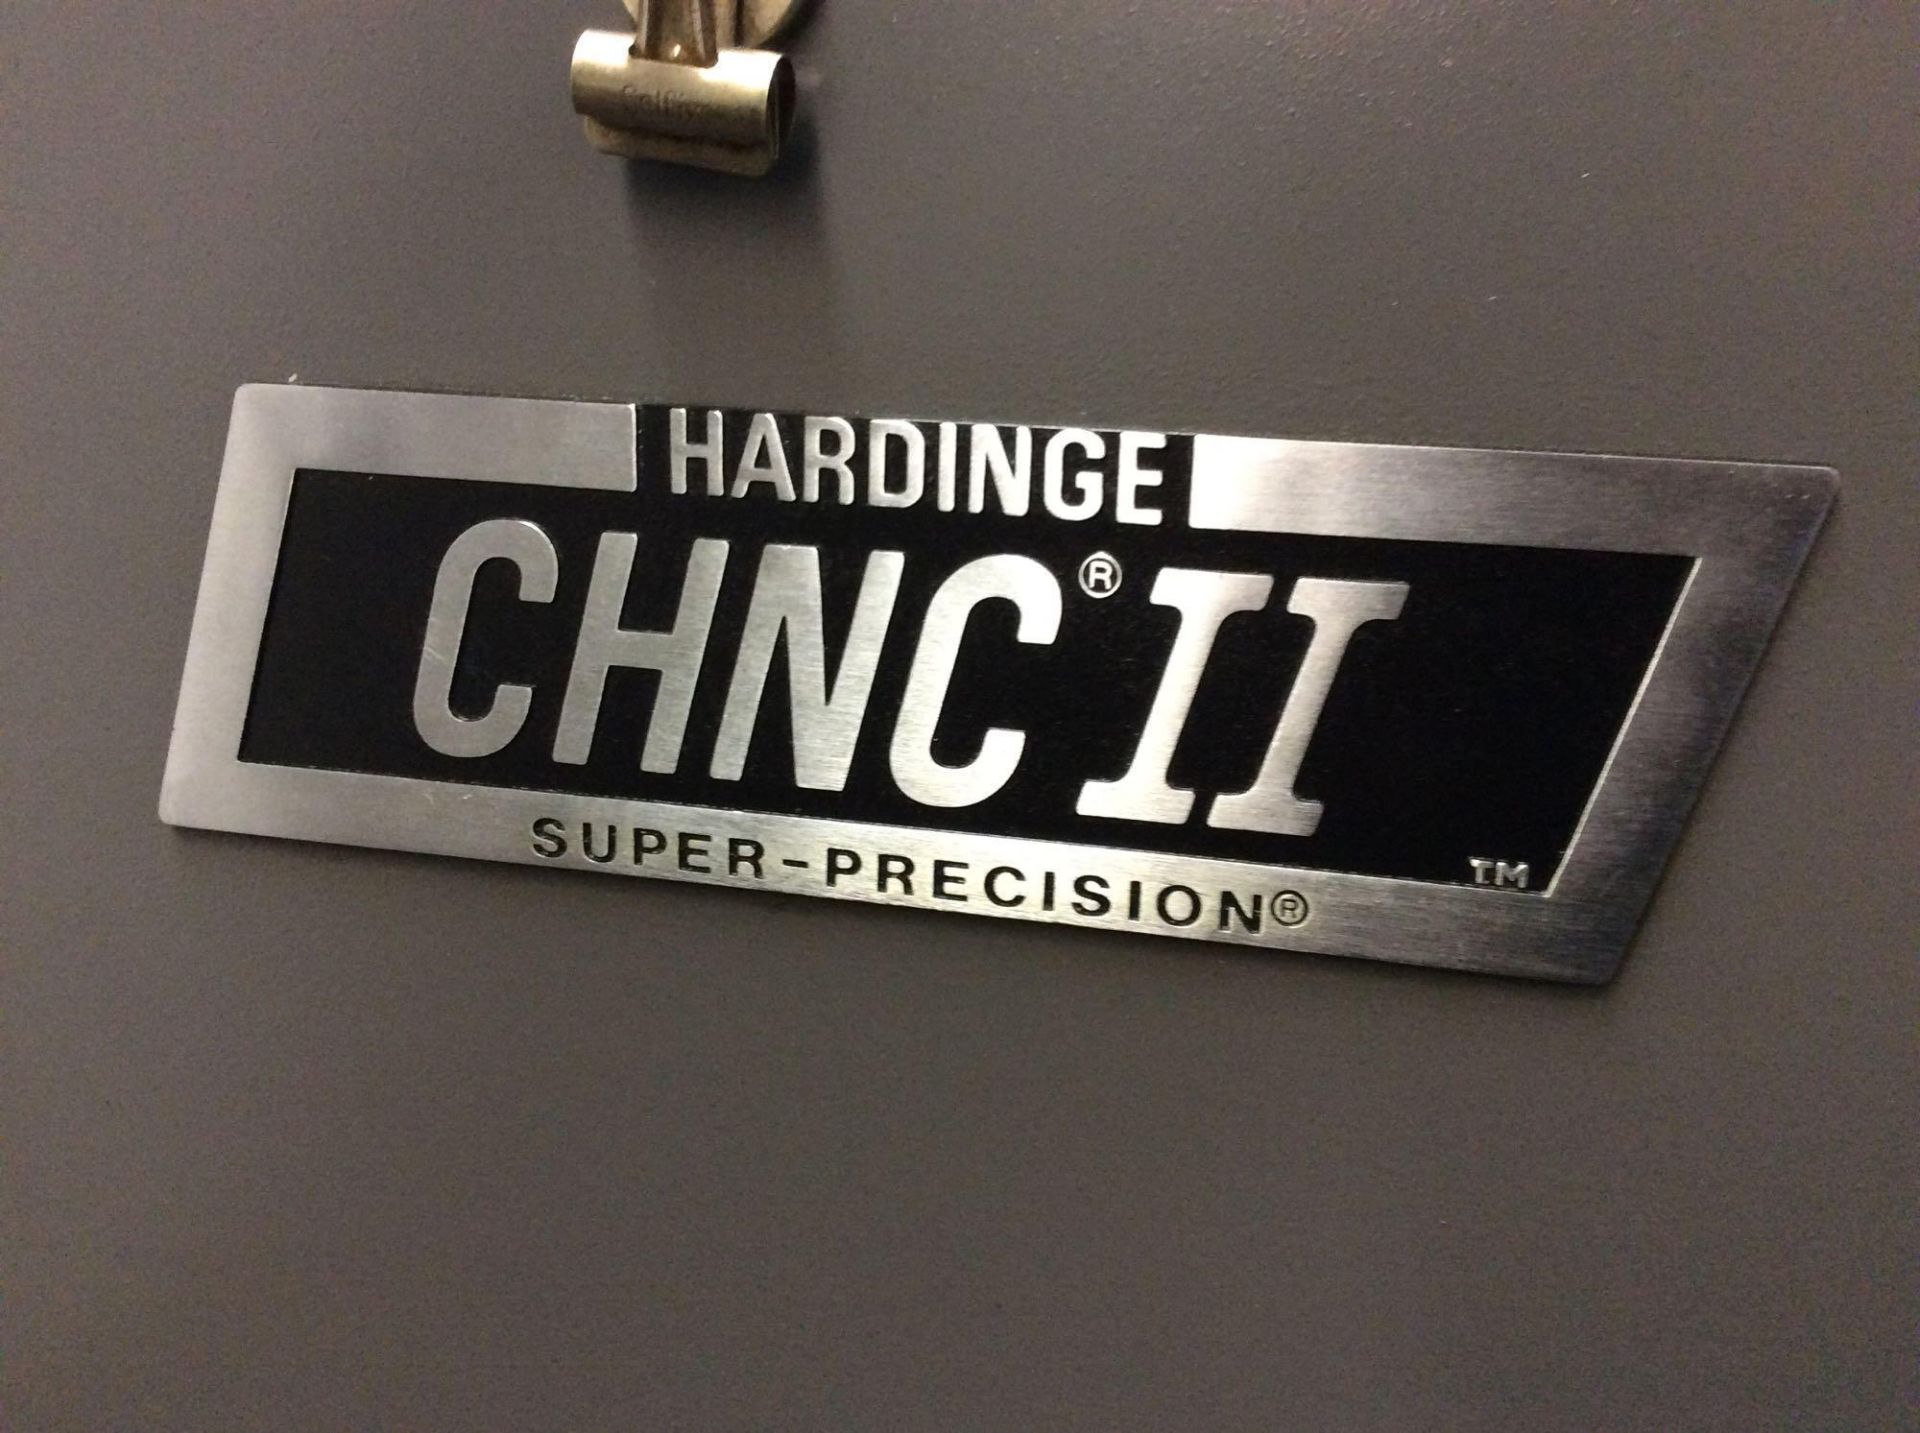 Hardinge CHNC II CNC turning center, mn CHNC II, sn CN-2013-A2-16, and 8 position turret - Image 4 of 6